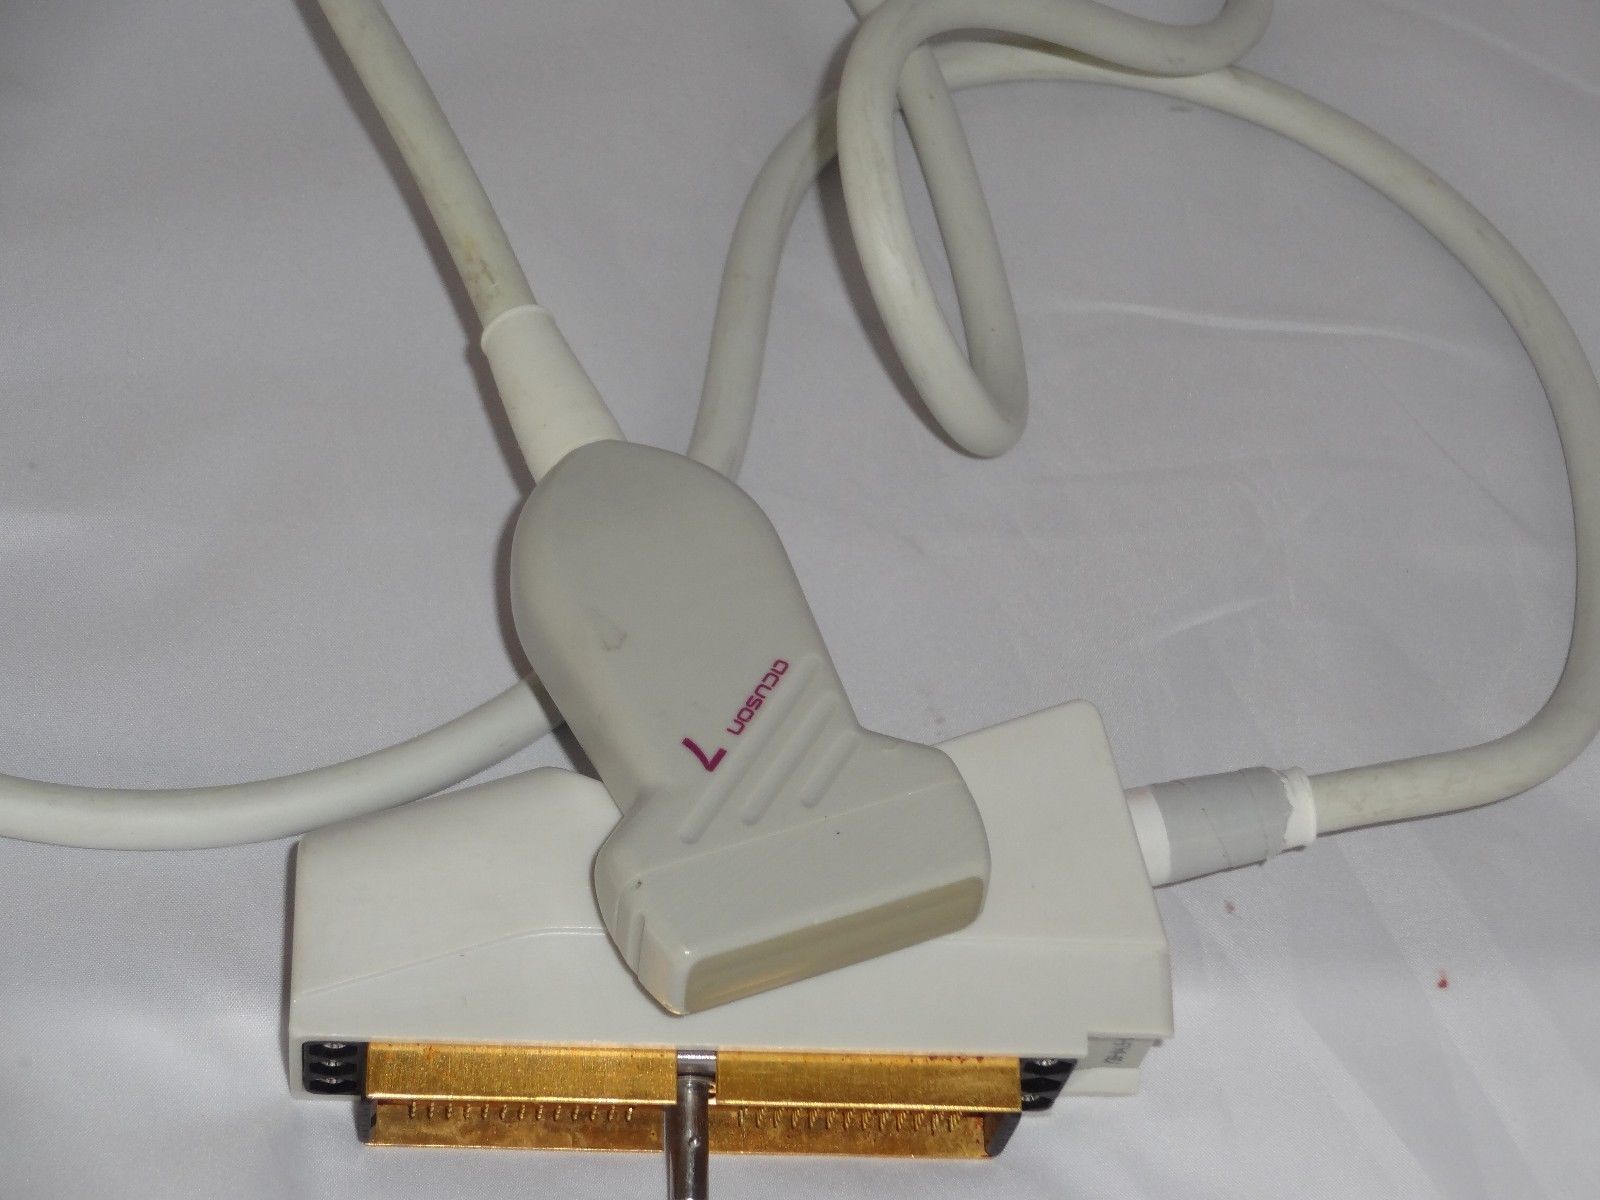 Acuson 7 Needle Guide L7 Probe Ultrasound Transducer DIAGNOSTIC ULTRASOUND MACHINES FOR SALE